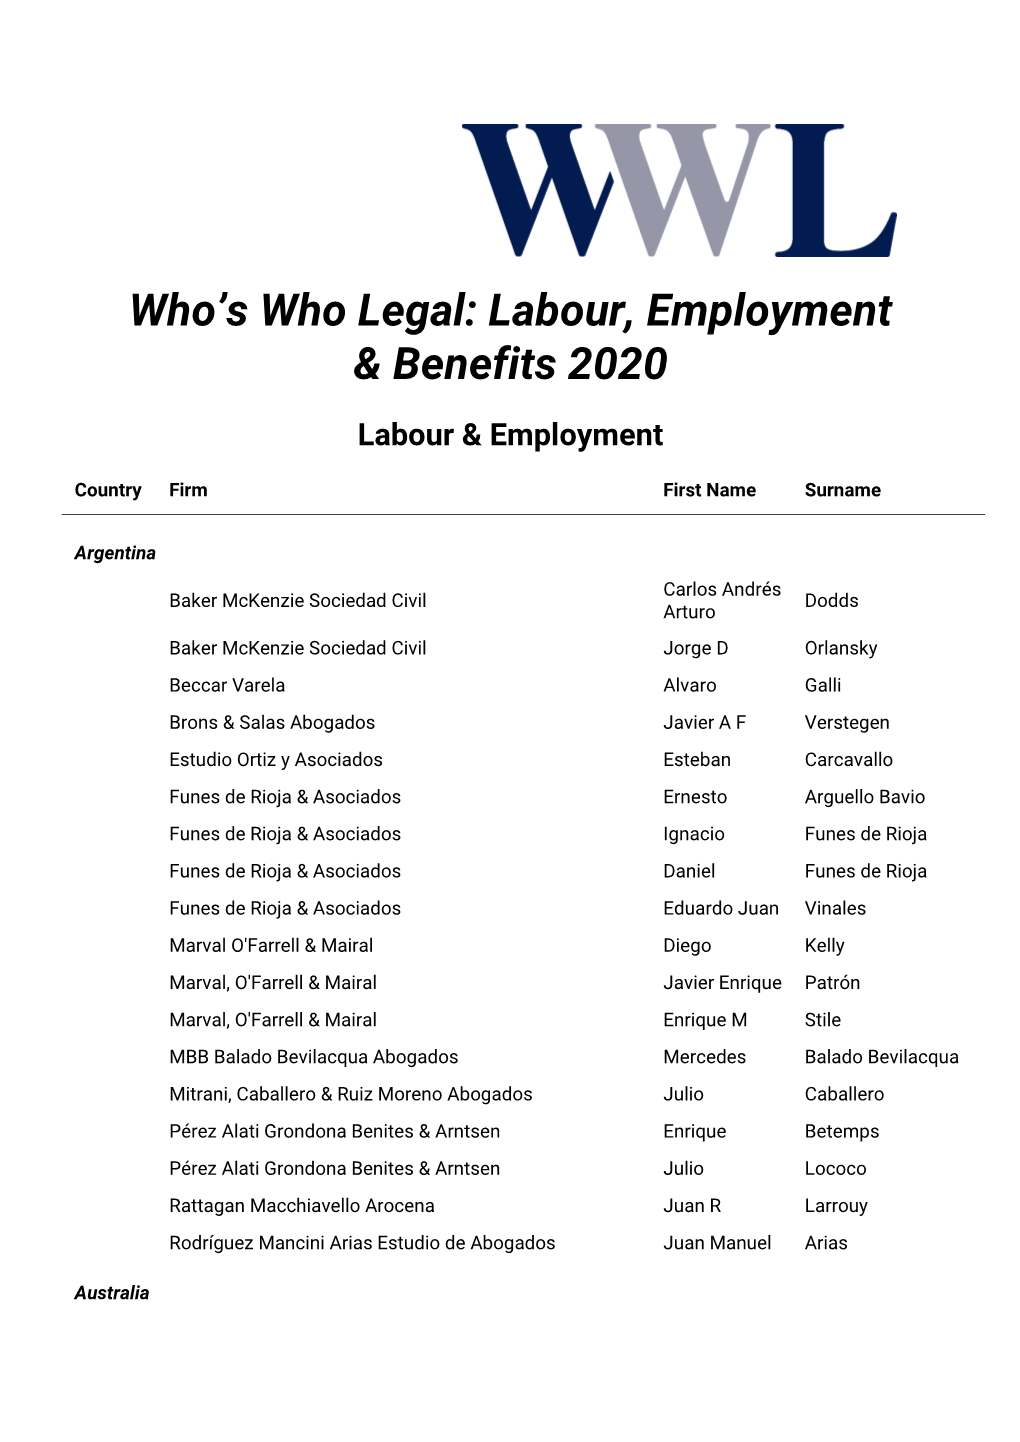 Who's Who Legal: Labour, Employment & Benefits 2020